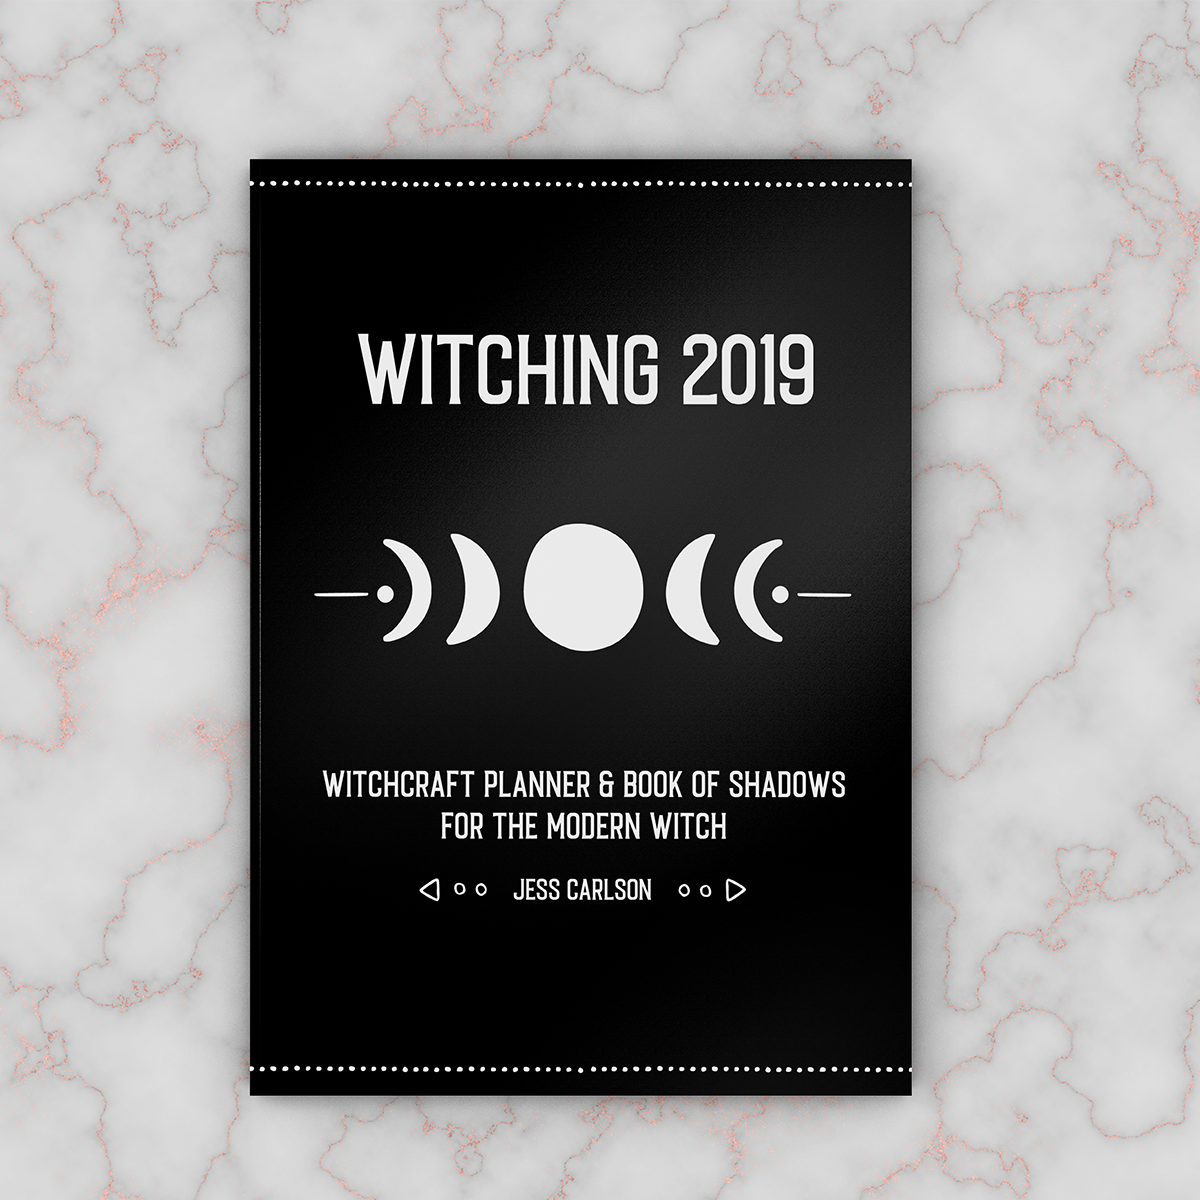 Witching 2019 is a digitial product in PDF format. No physical item will be sent and all photos are for illustration purposes only.